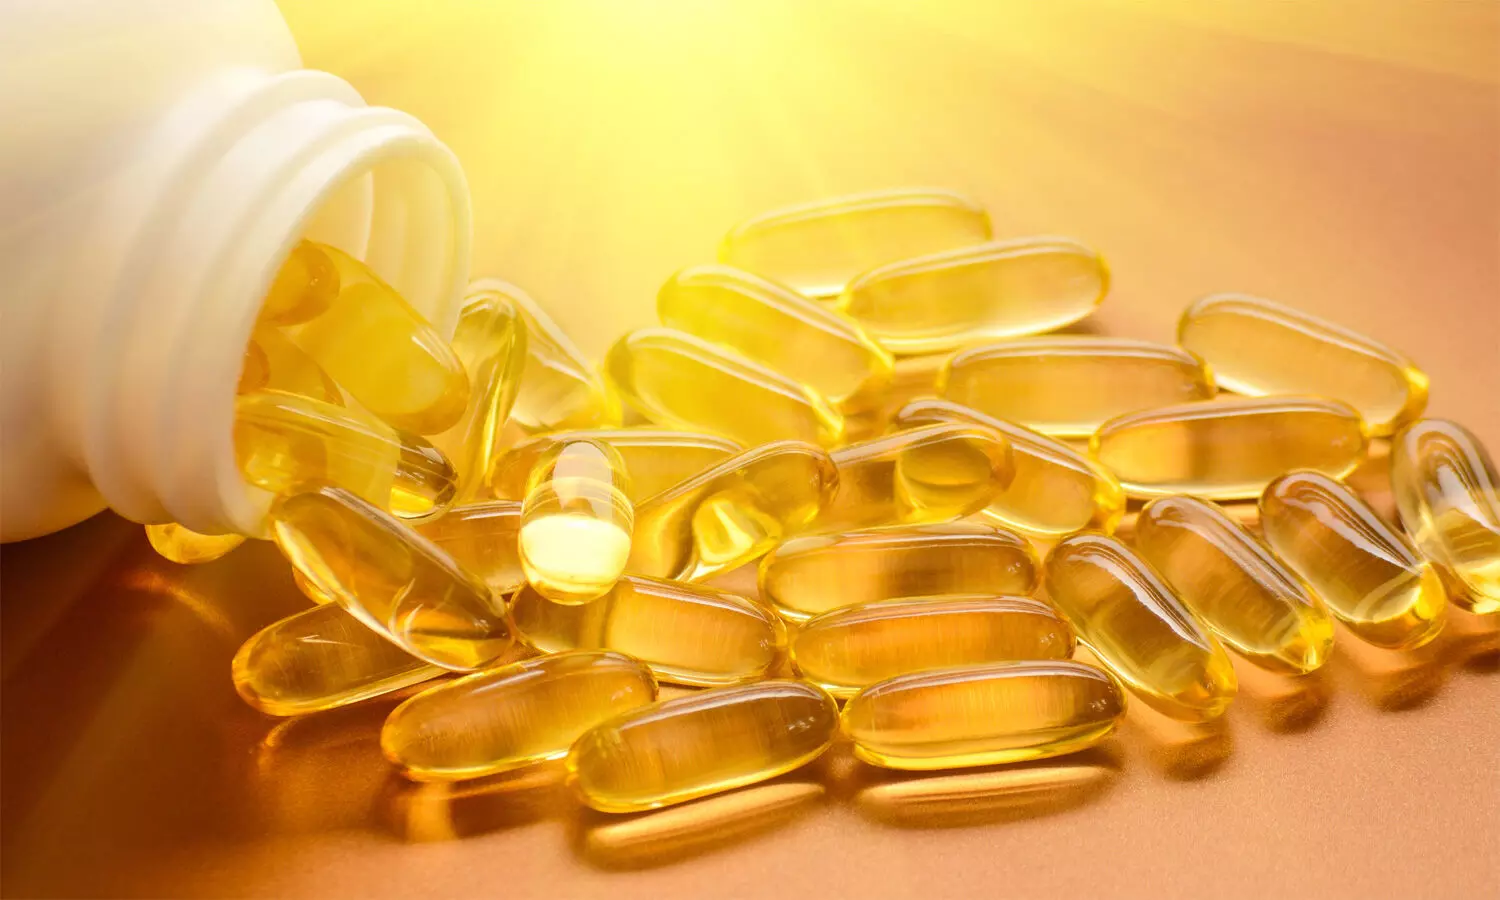 Vitamin D supplements may help prevent immunotherapy induced colitis